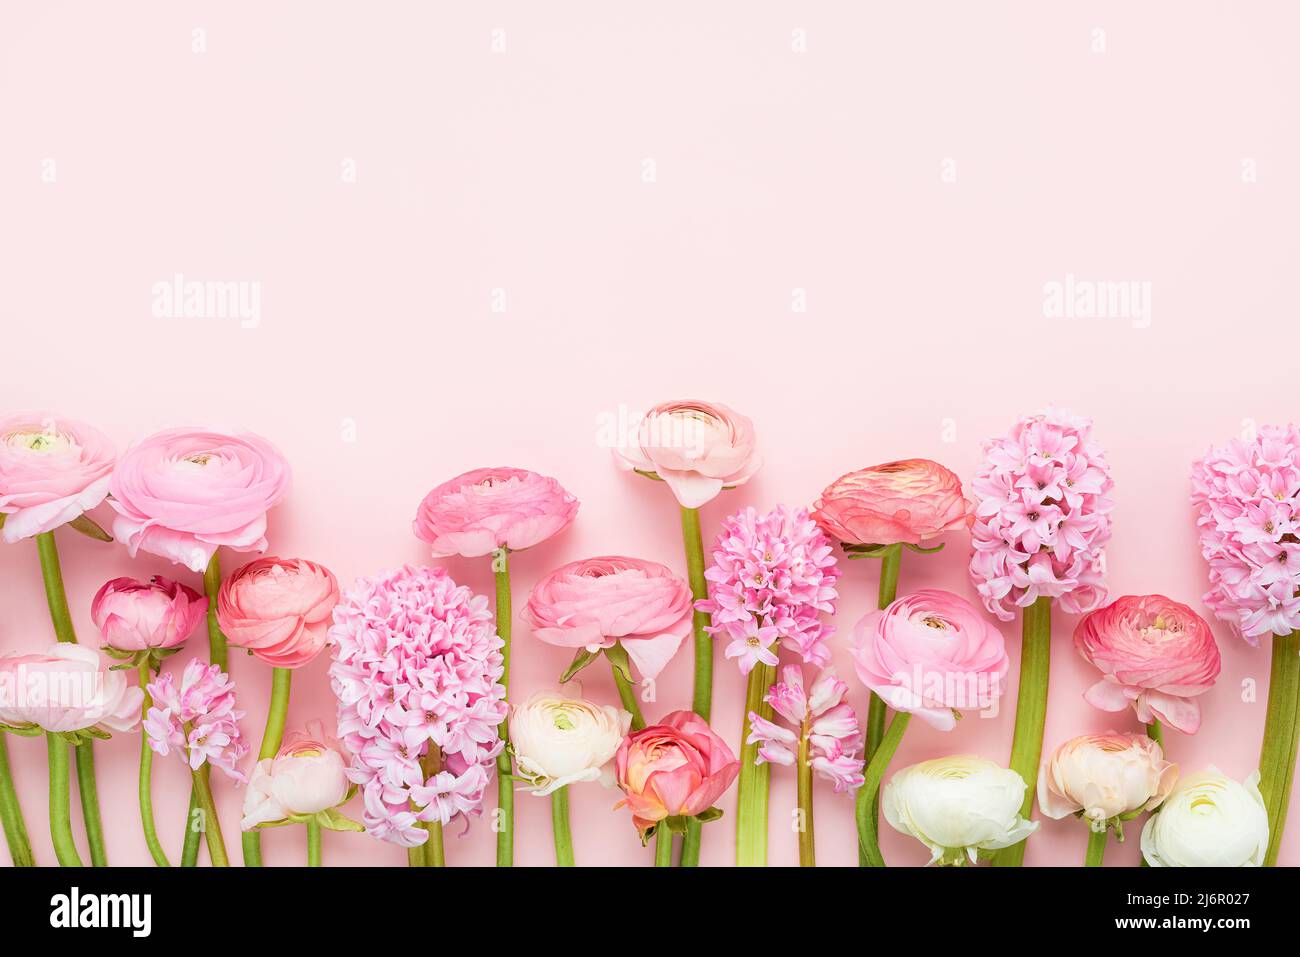 Border of pink ranunculus and hyacinths on a pink background. Mothers Day, Valentines Day, birthday concept. Top view, copy space for text Stock Photo